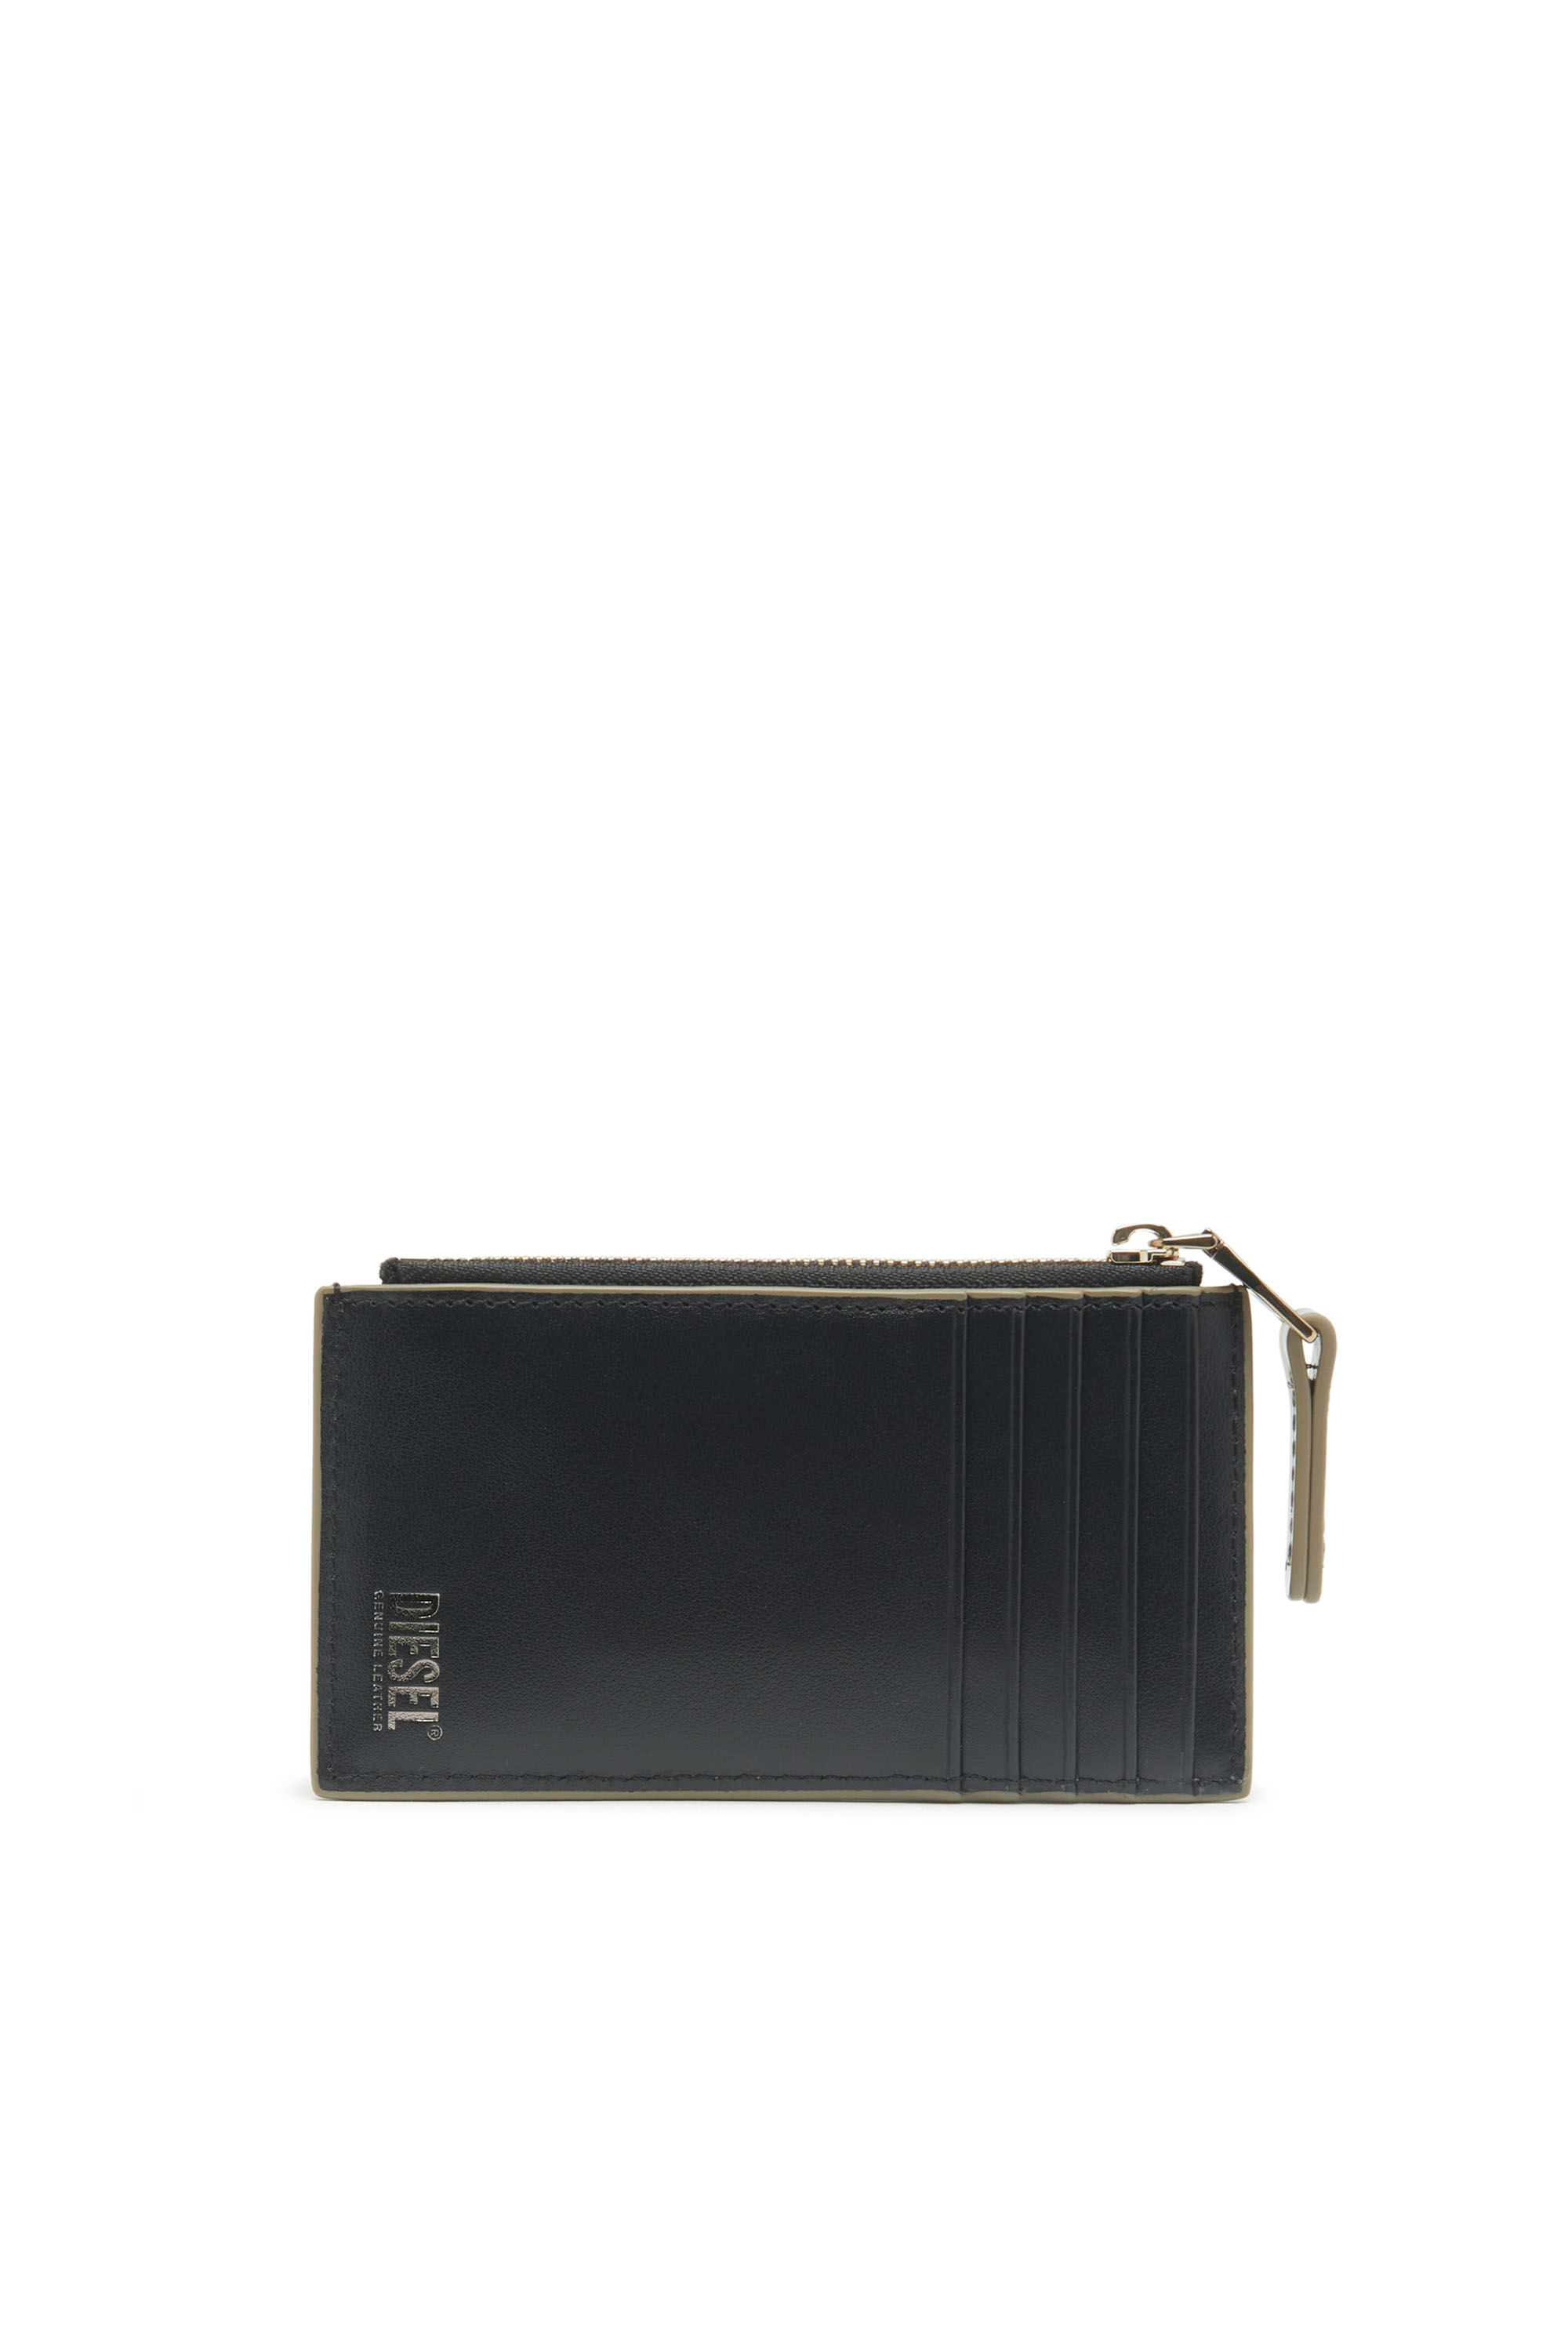 Diesel - CARD HOLDER COIN S, ブロンズ - Image 2